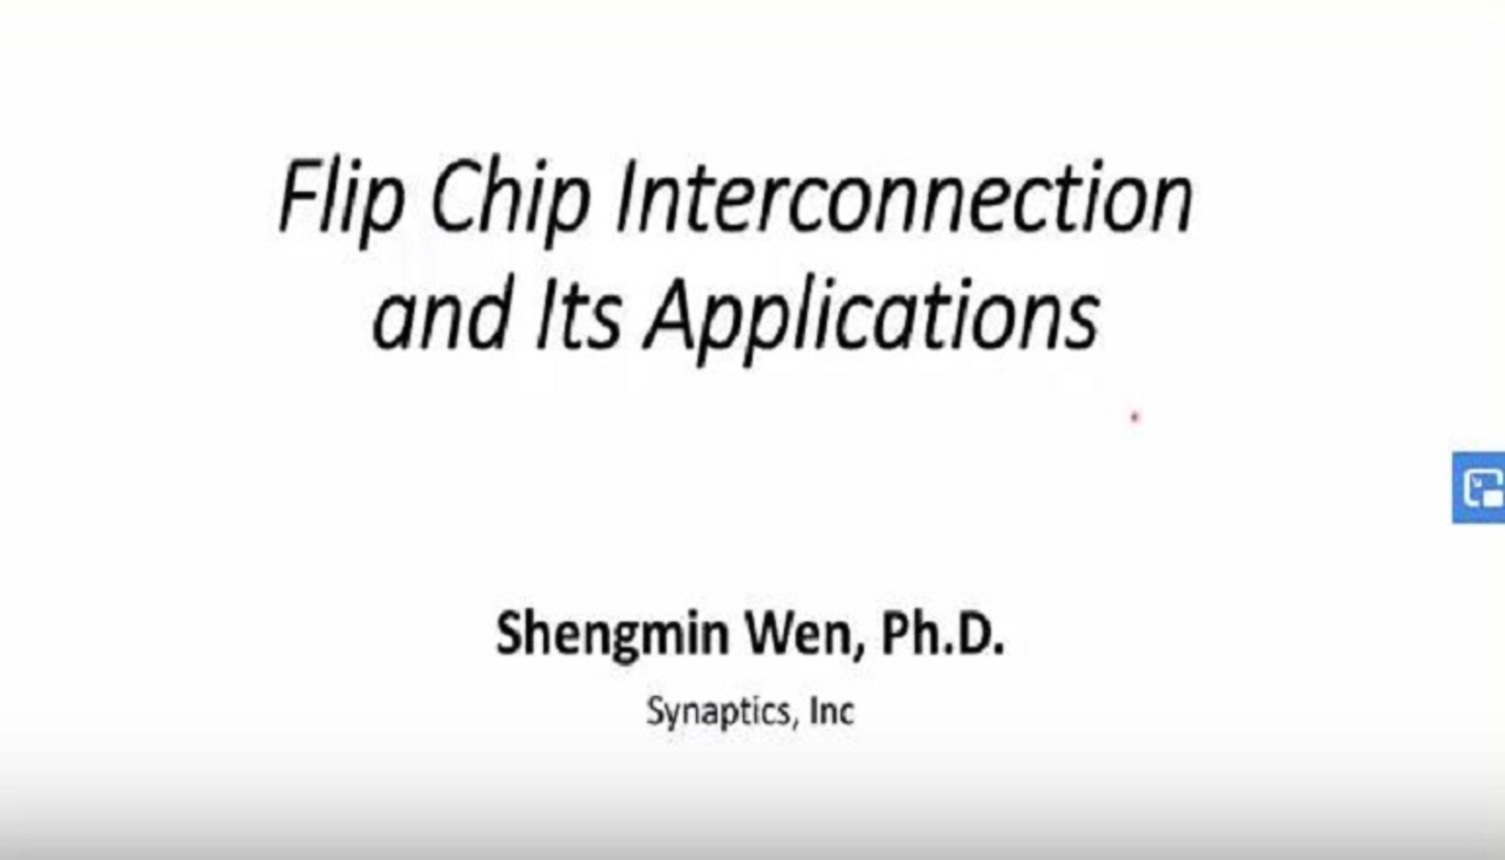 Flip Chip Interconnection and Its Applications